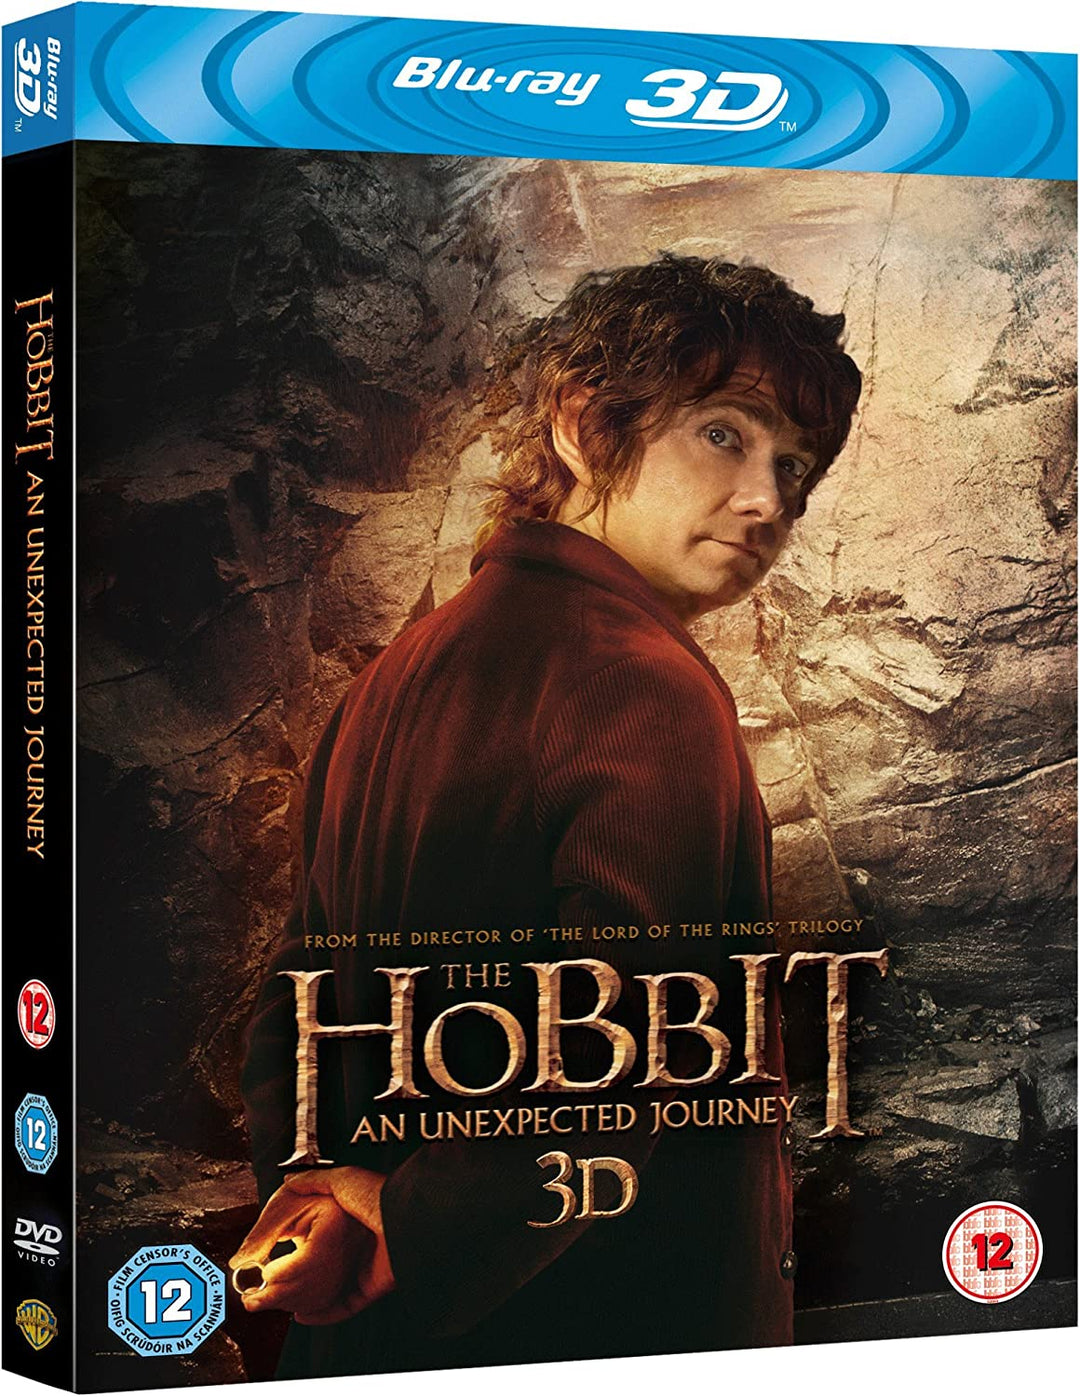 The Hobbit: An Unexpected Journey [Blu-ray 3D + Blu-ray + UV Copy] [2013] [Region Free]